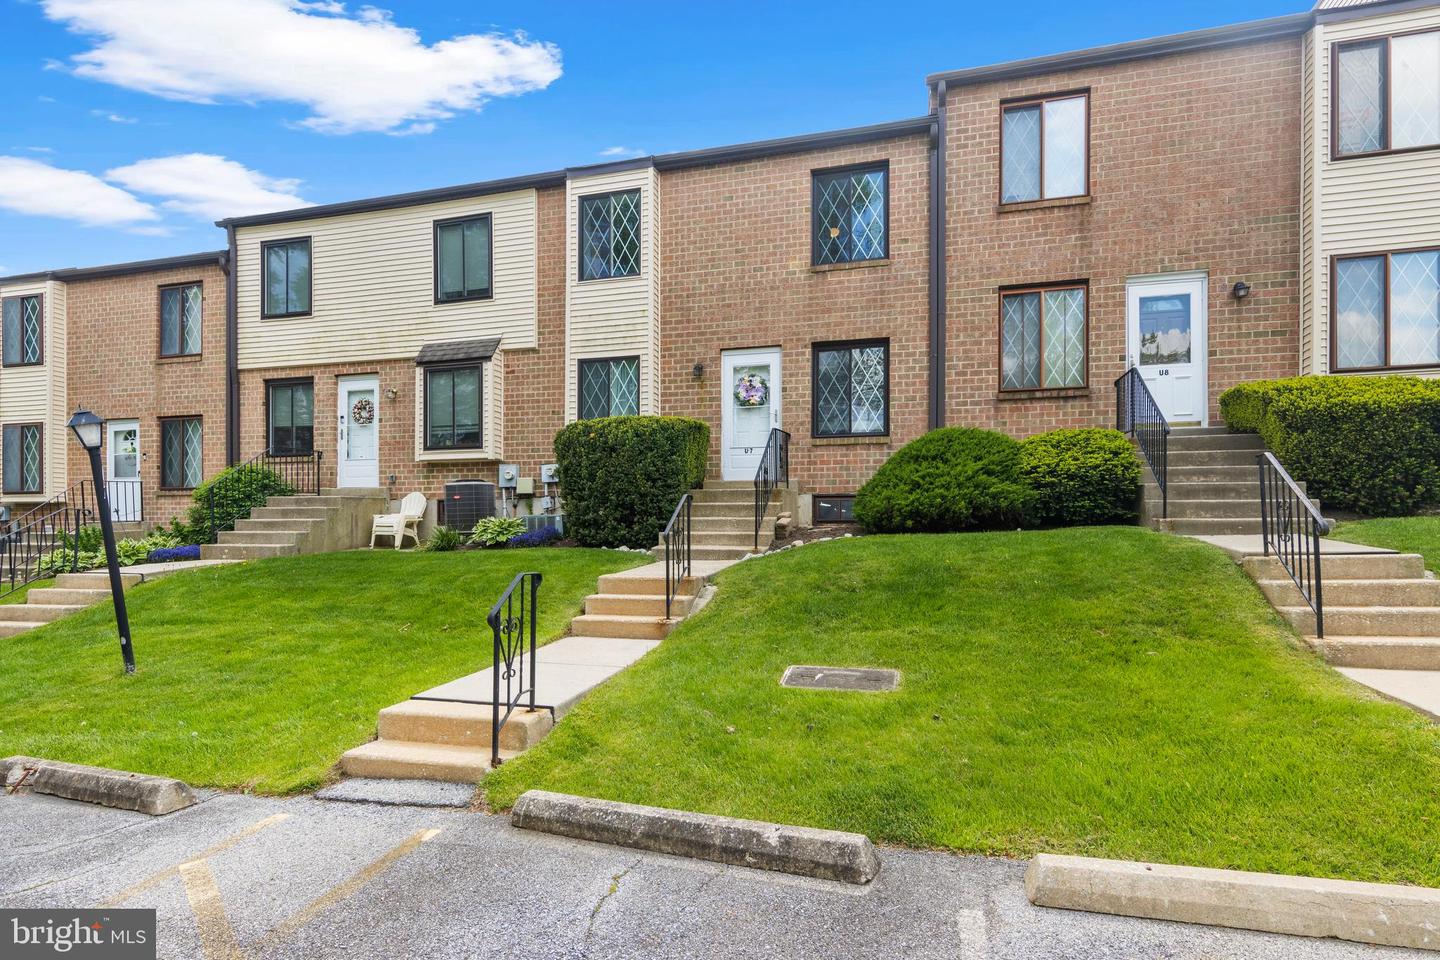 View Brookhaven, PA 19015 townhome